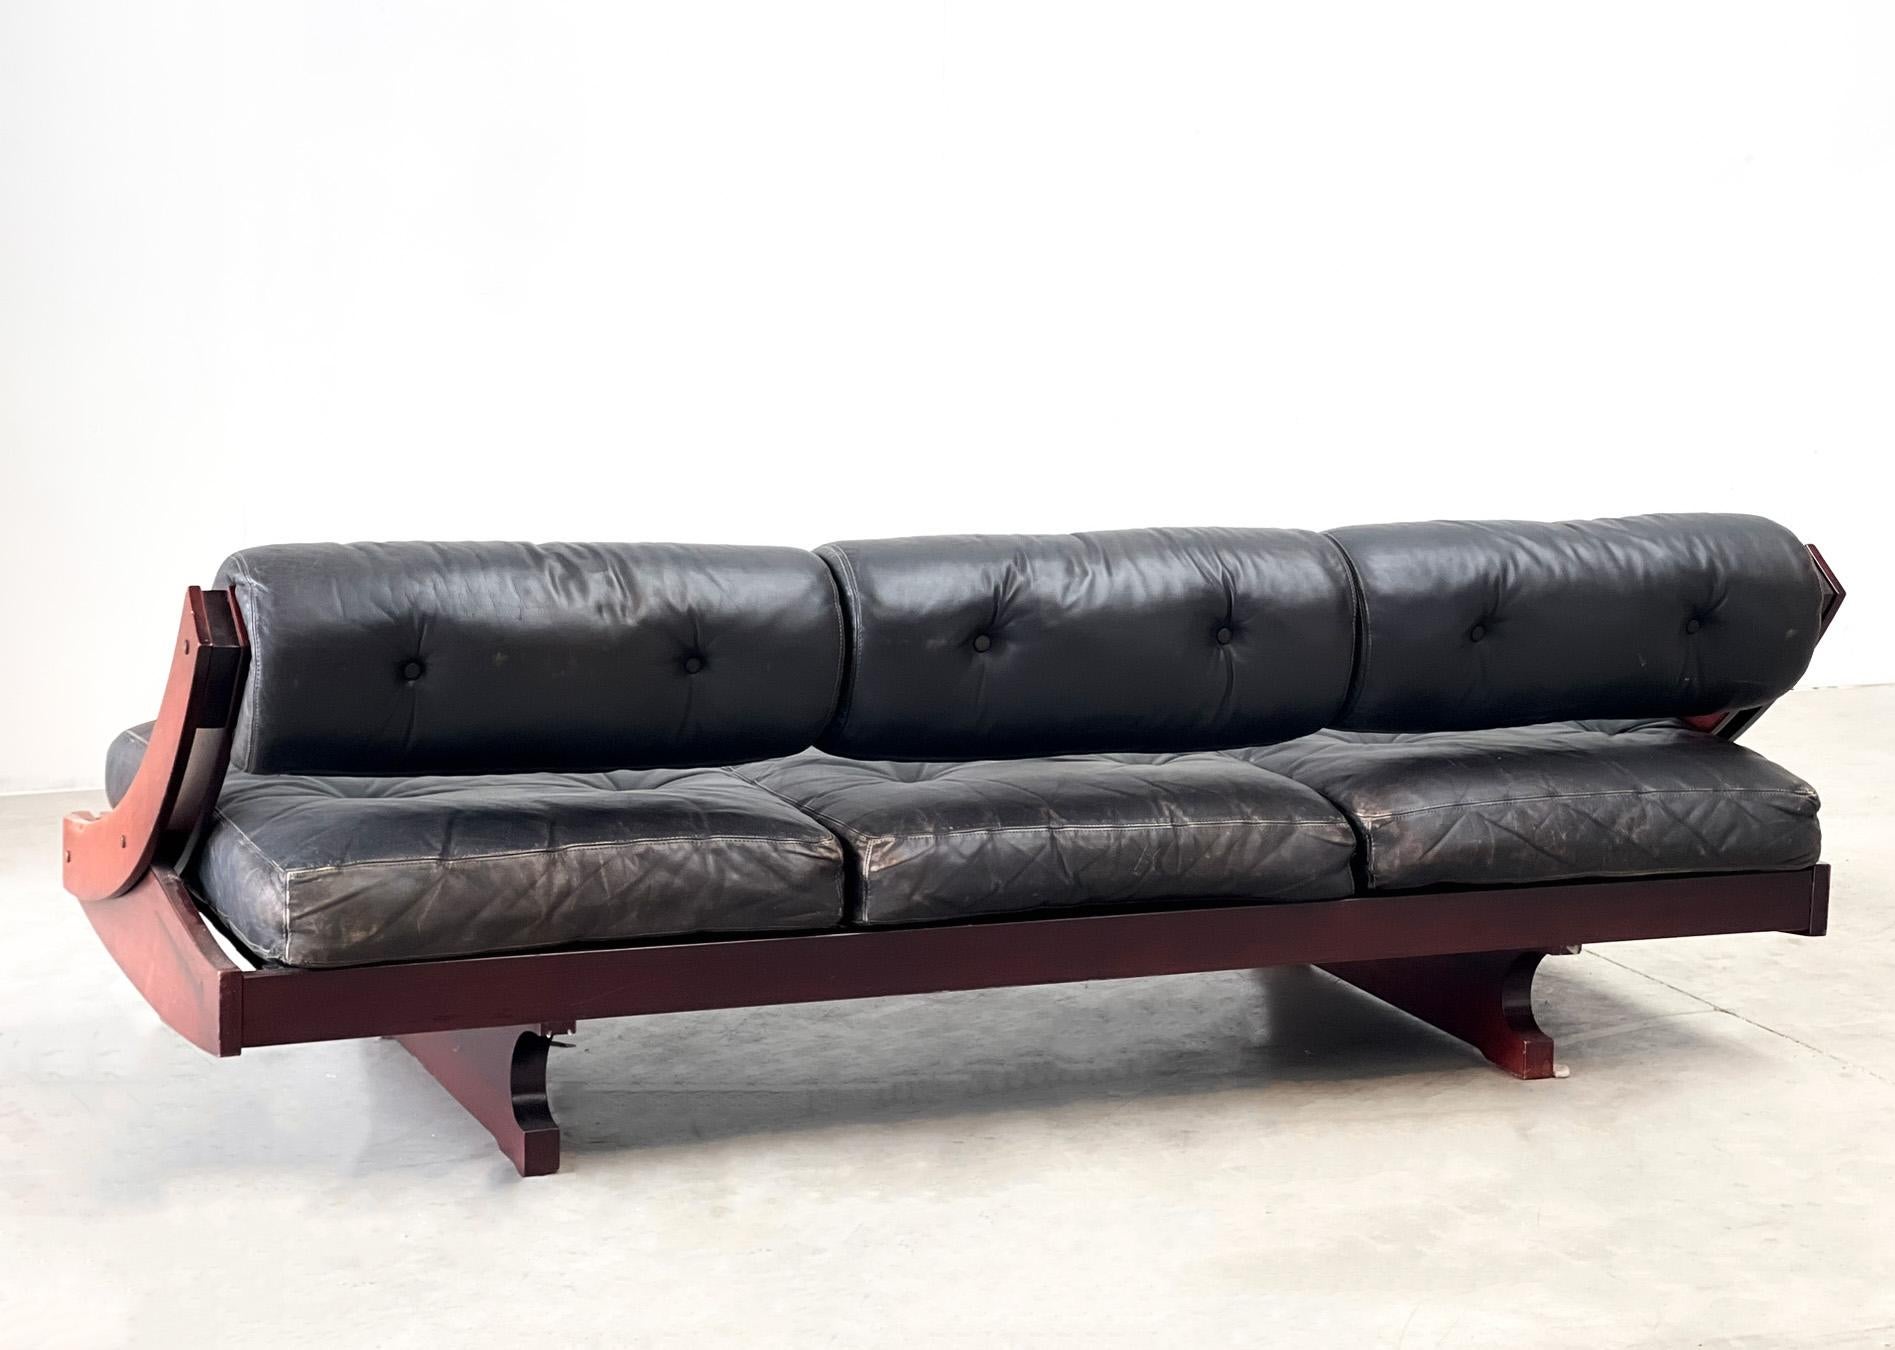 GS195 black leather sofa or daybed by Gianni Songia 2